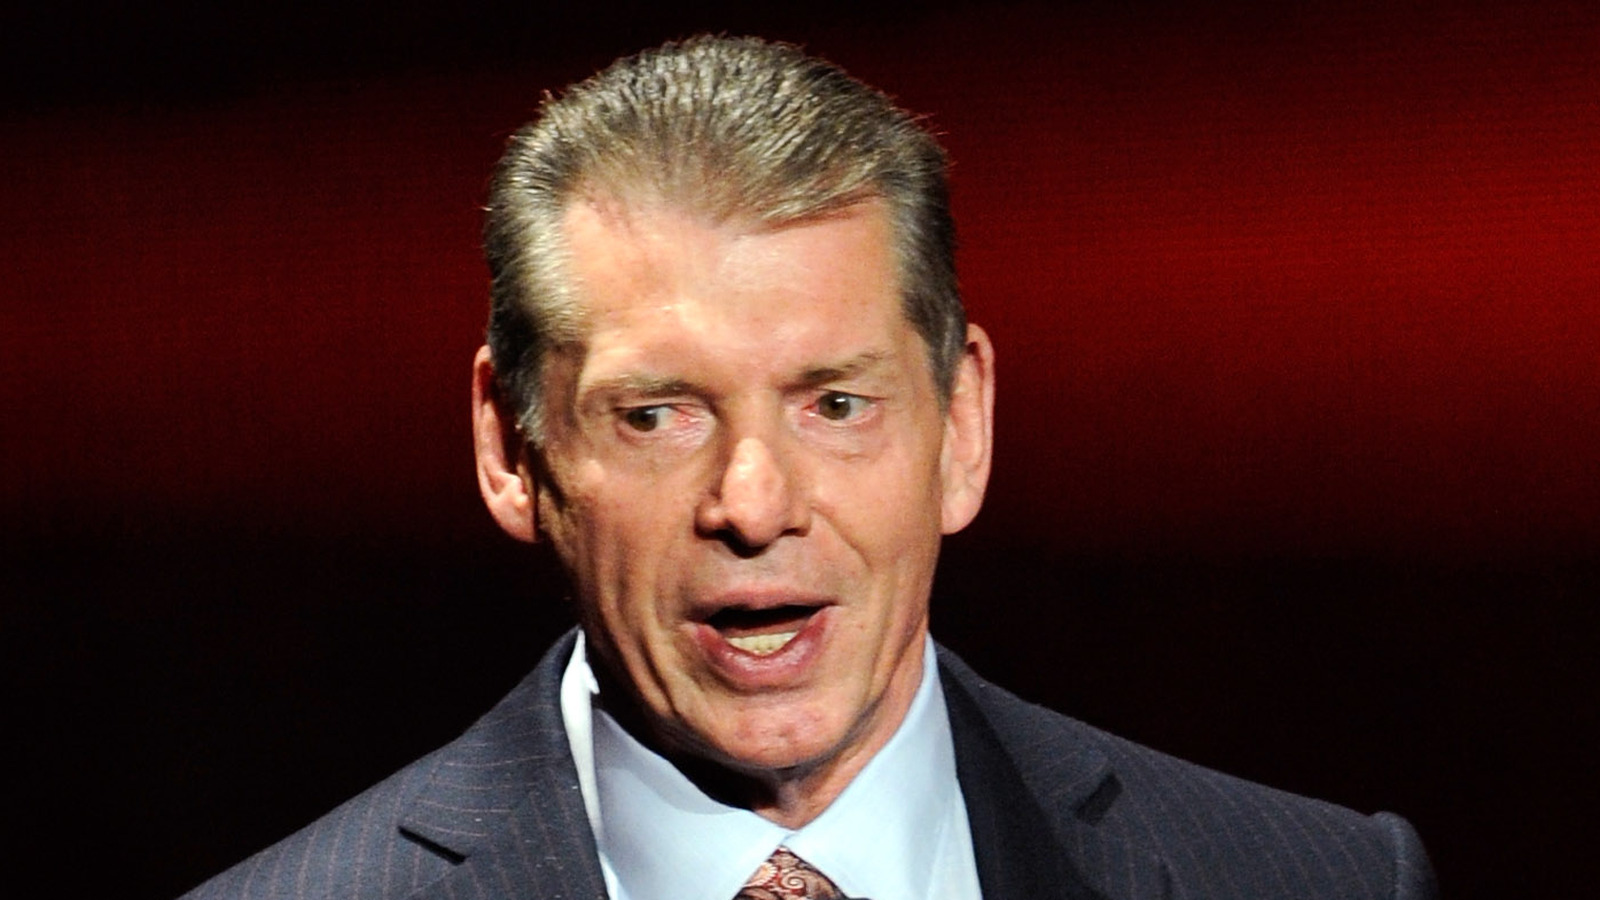 Janel Grant's Lawyer Calls Love Letter 'Further Proof Of Misconduct' By Vince McMahon